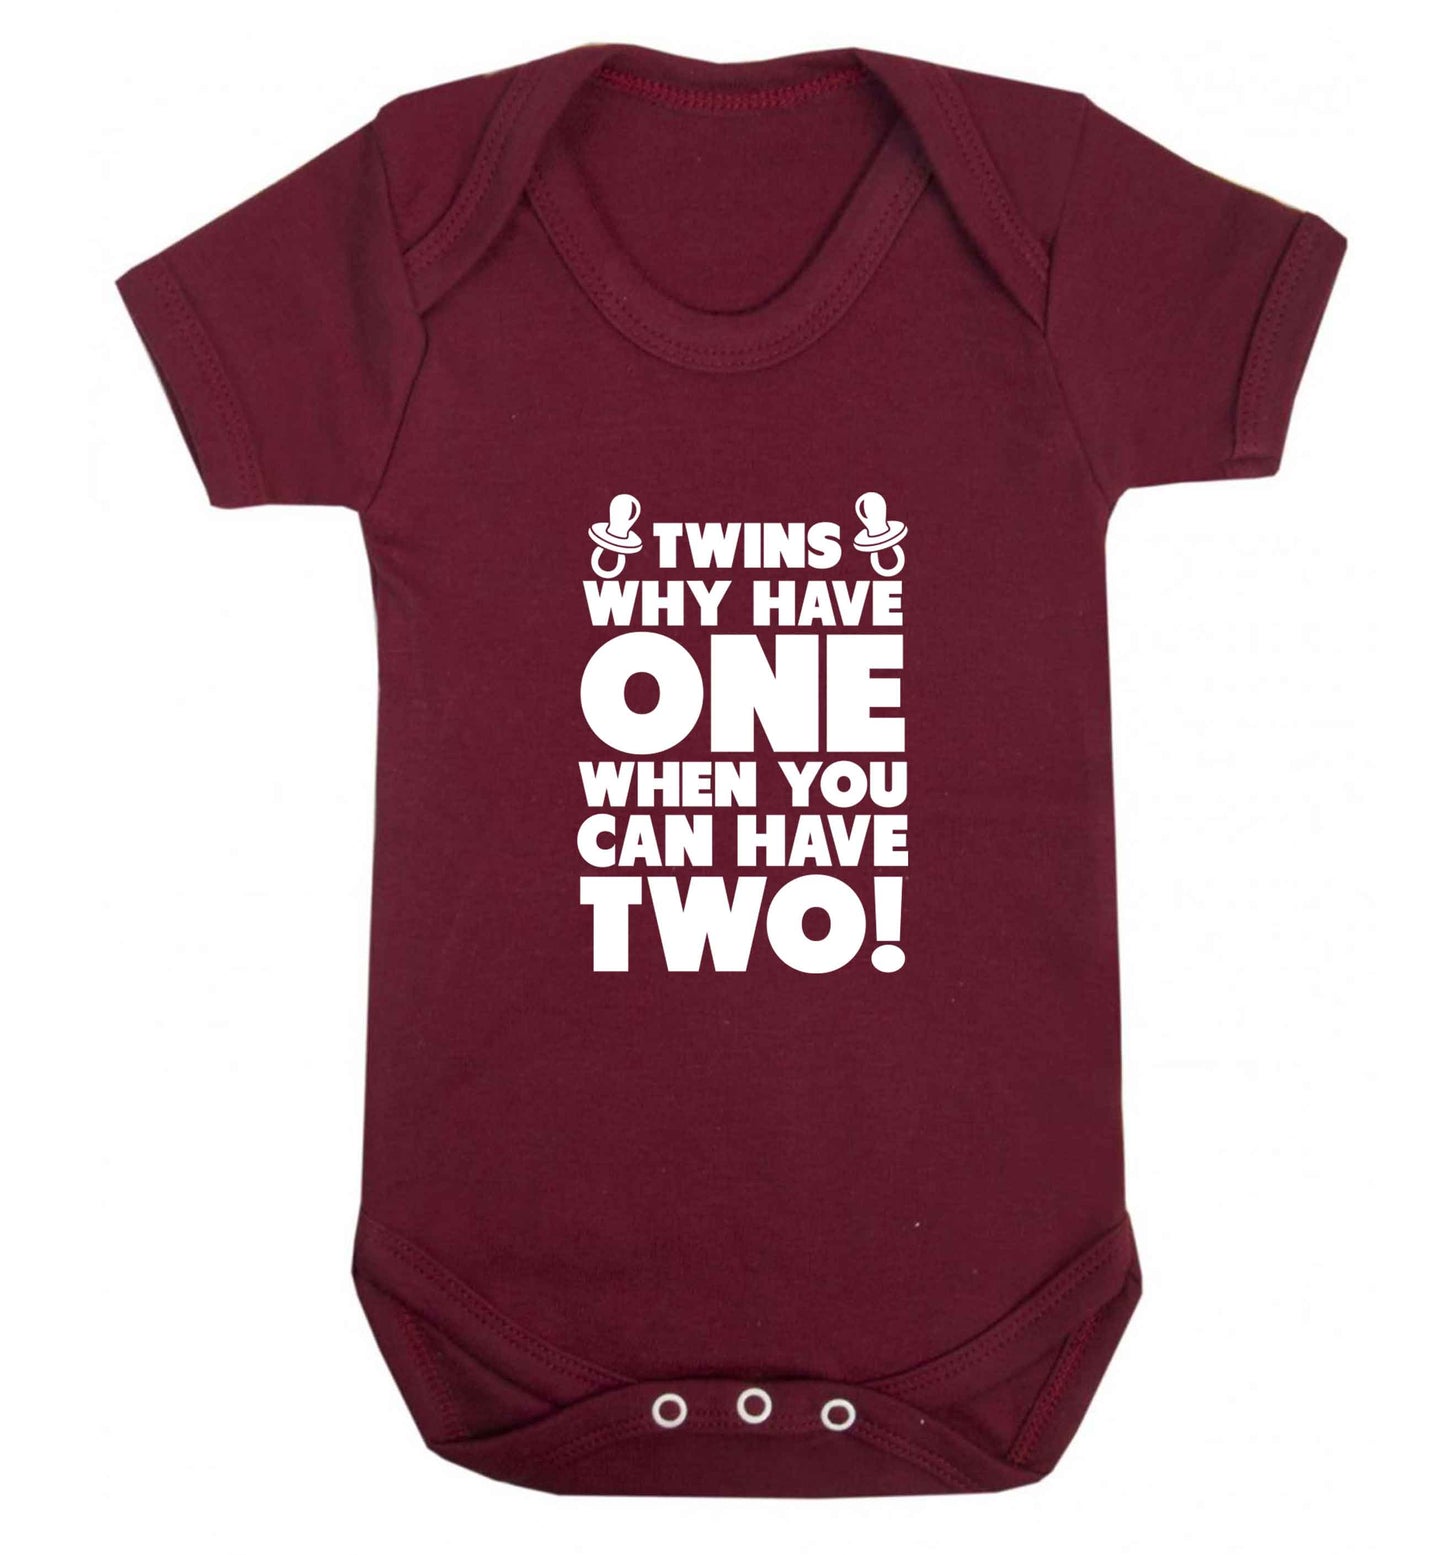 Twins why have one when you can have two baby vest maroon 18-24 months